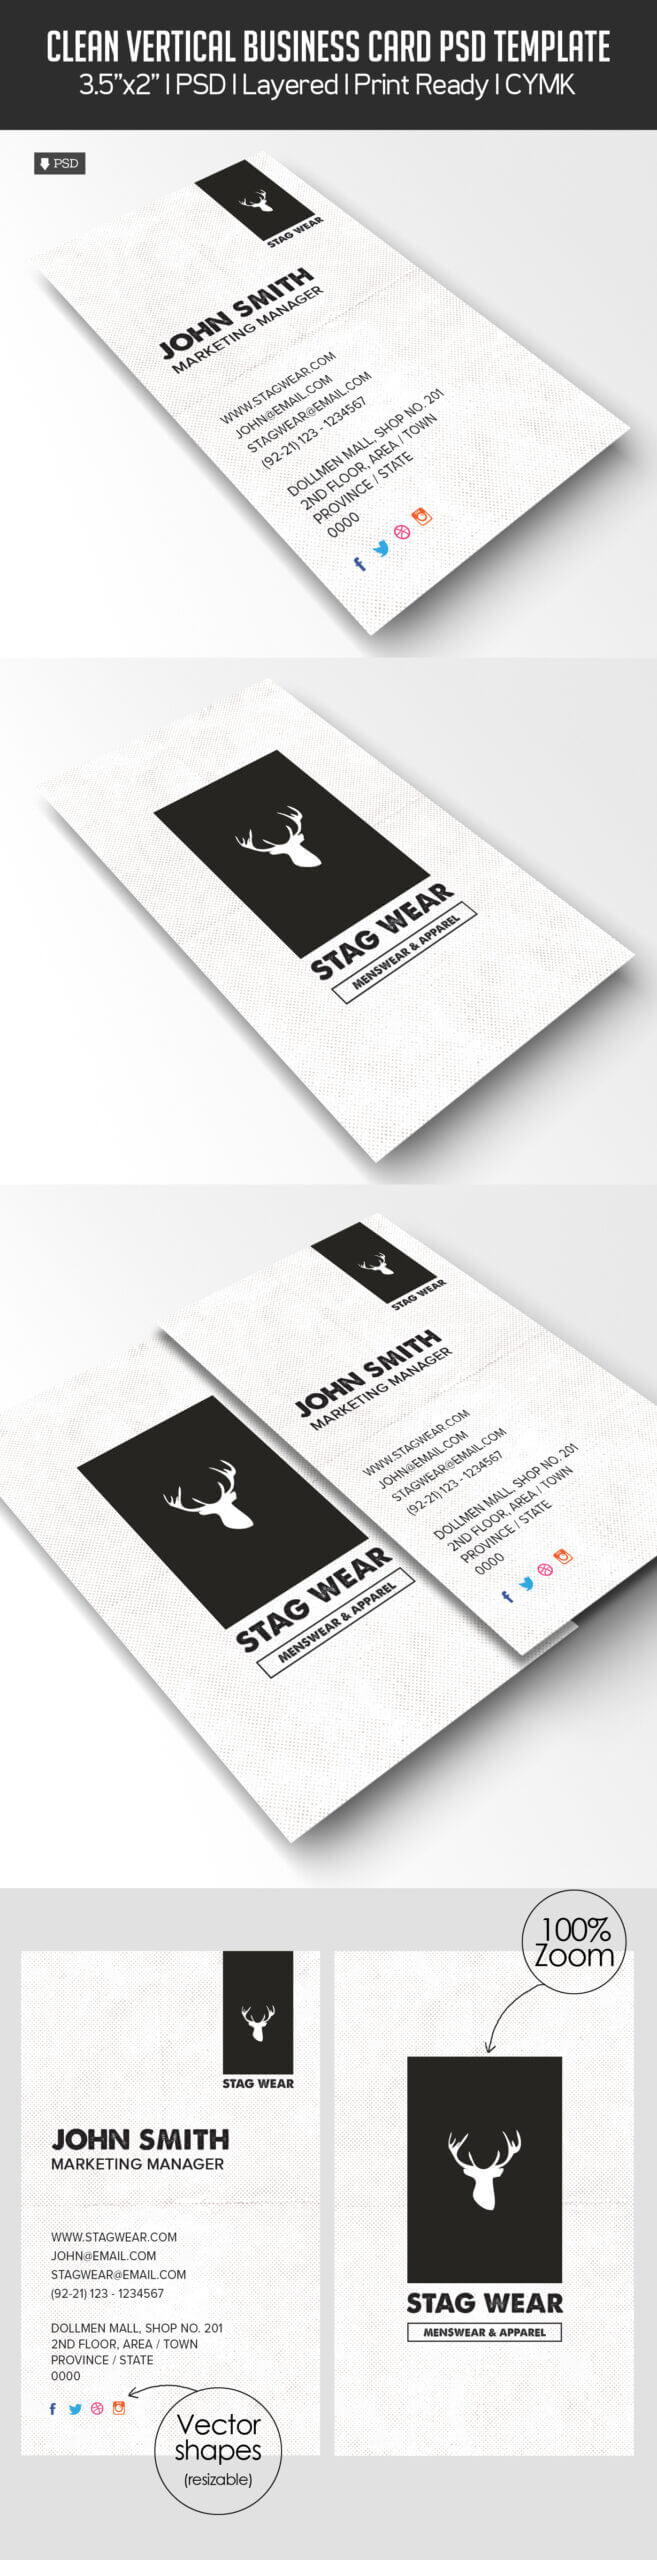 Freebie – Vertical Business Card Psd Template | Freebies Intended For Photoshop Business Card Template With Bleed